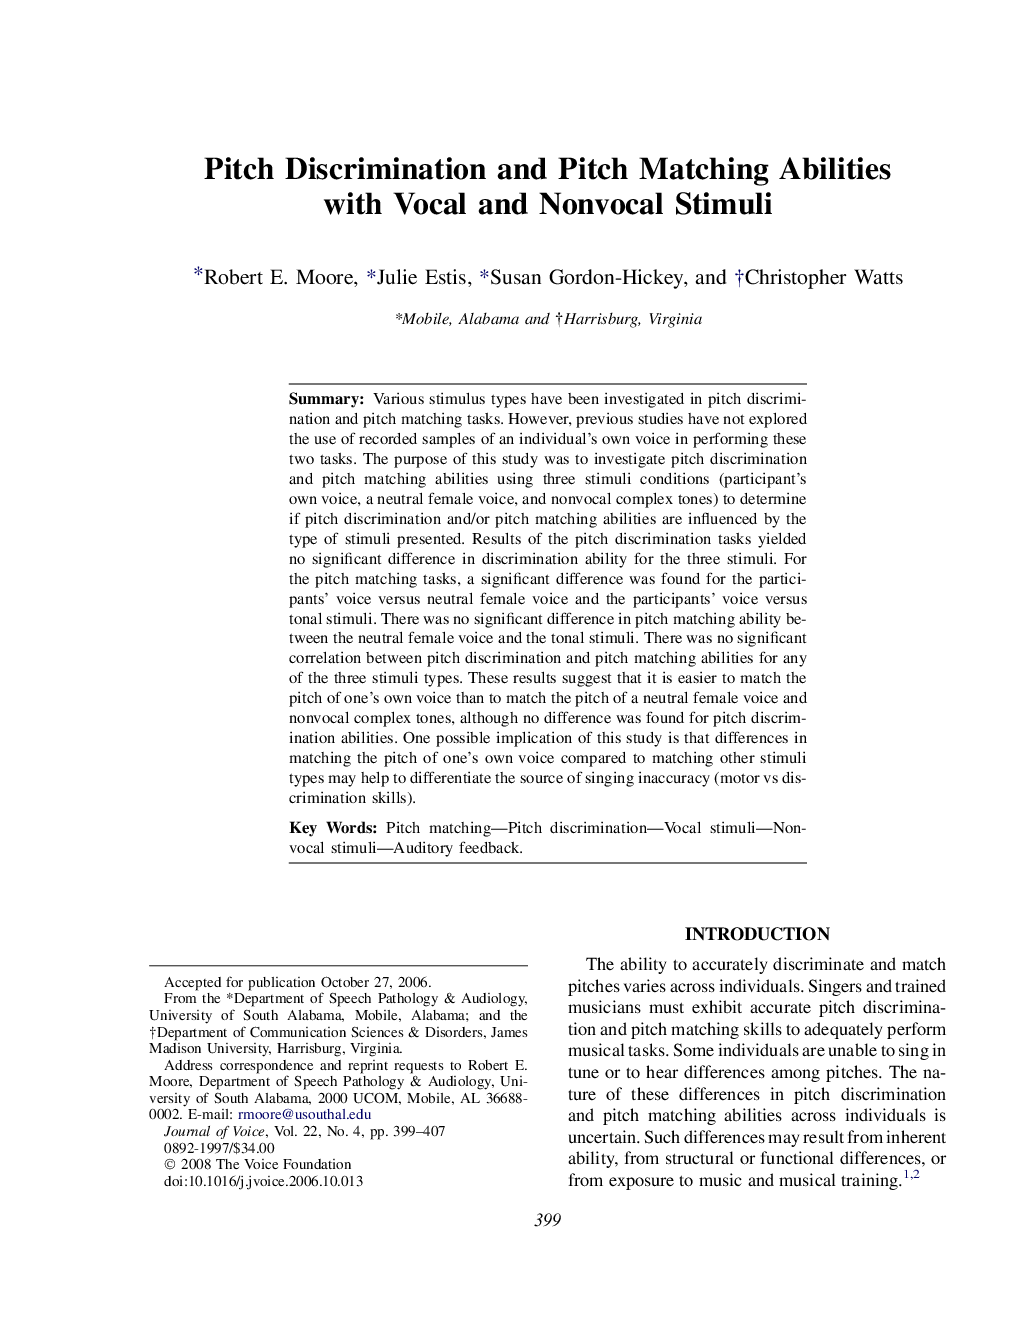 Pitch Discrimination and Pitch Matching Abilities with Vocal and Nonvocal Stimuli